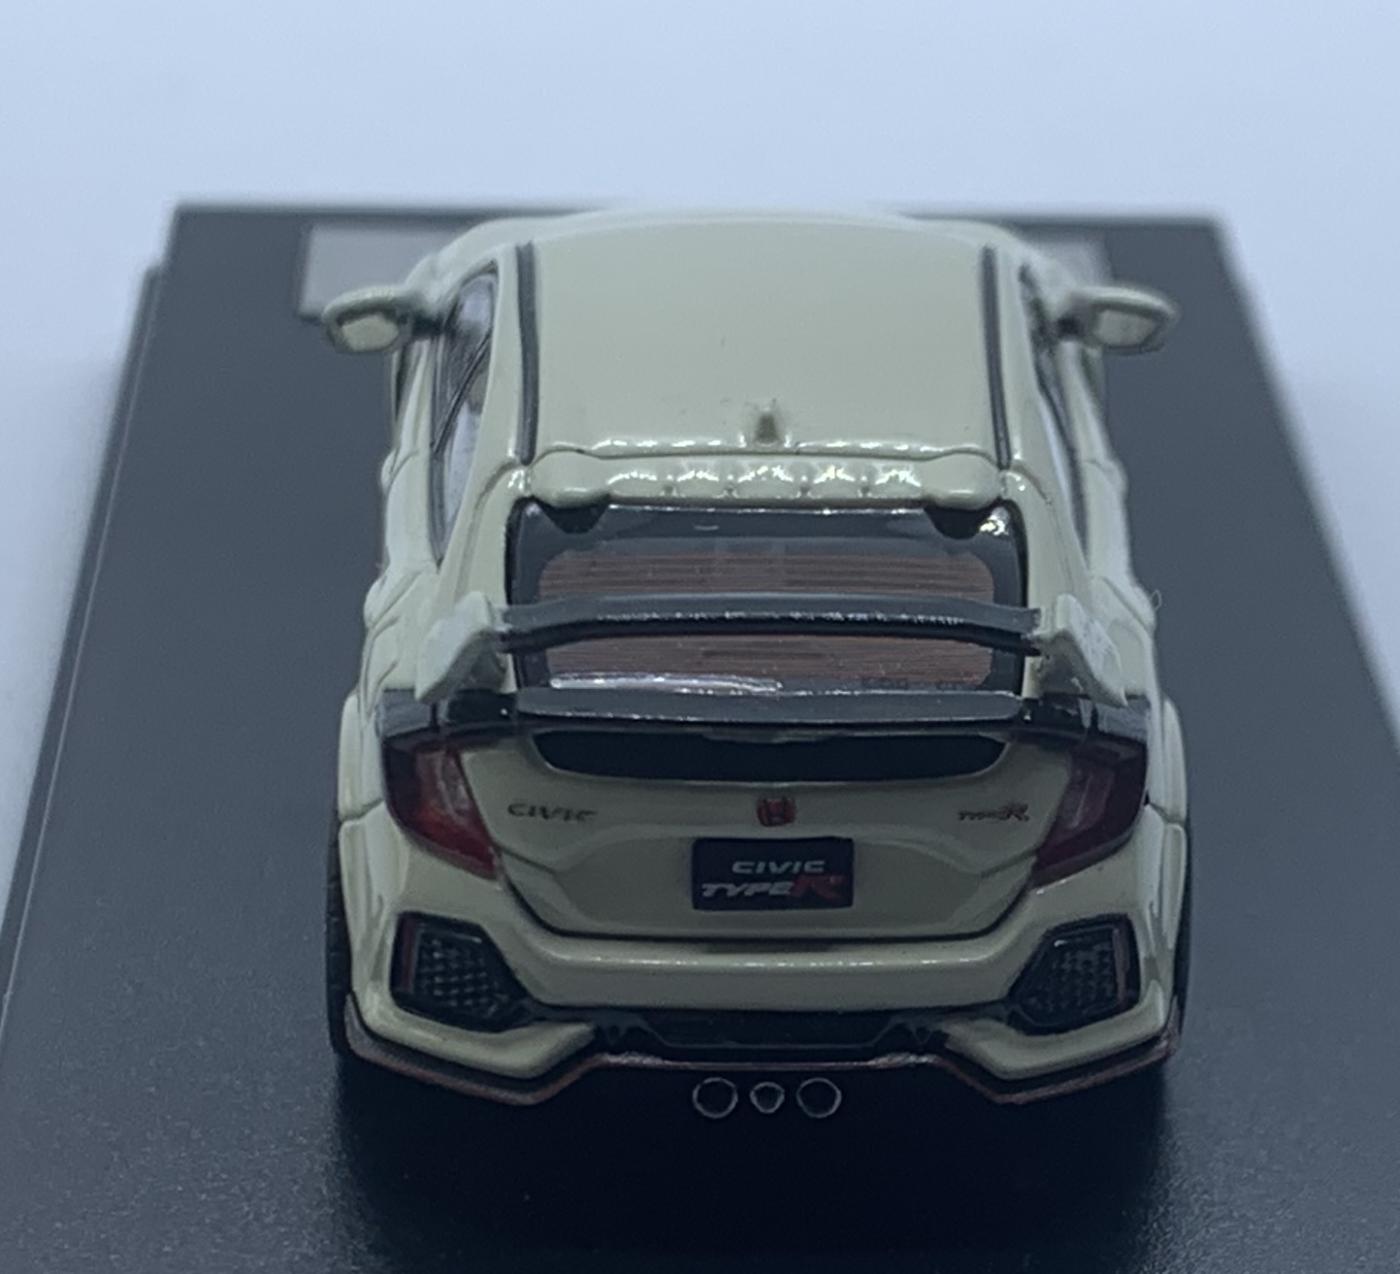 An excellent scale model of a Honda Civic Type R decorated in white with high rear spoiler and black wheels with red rims